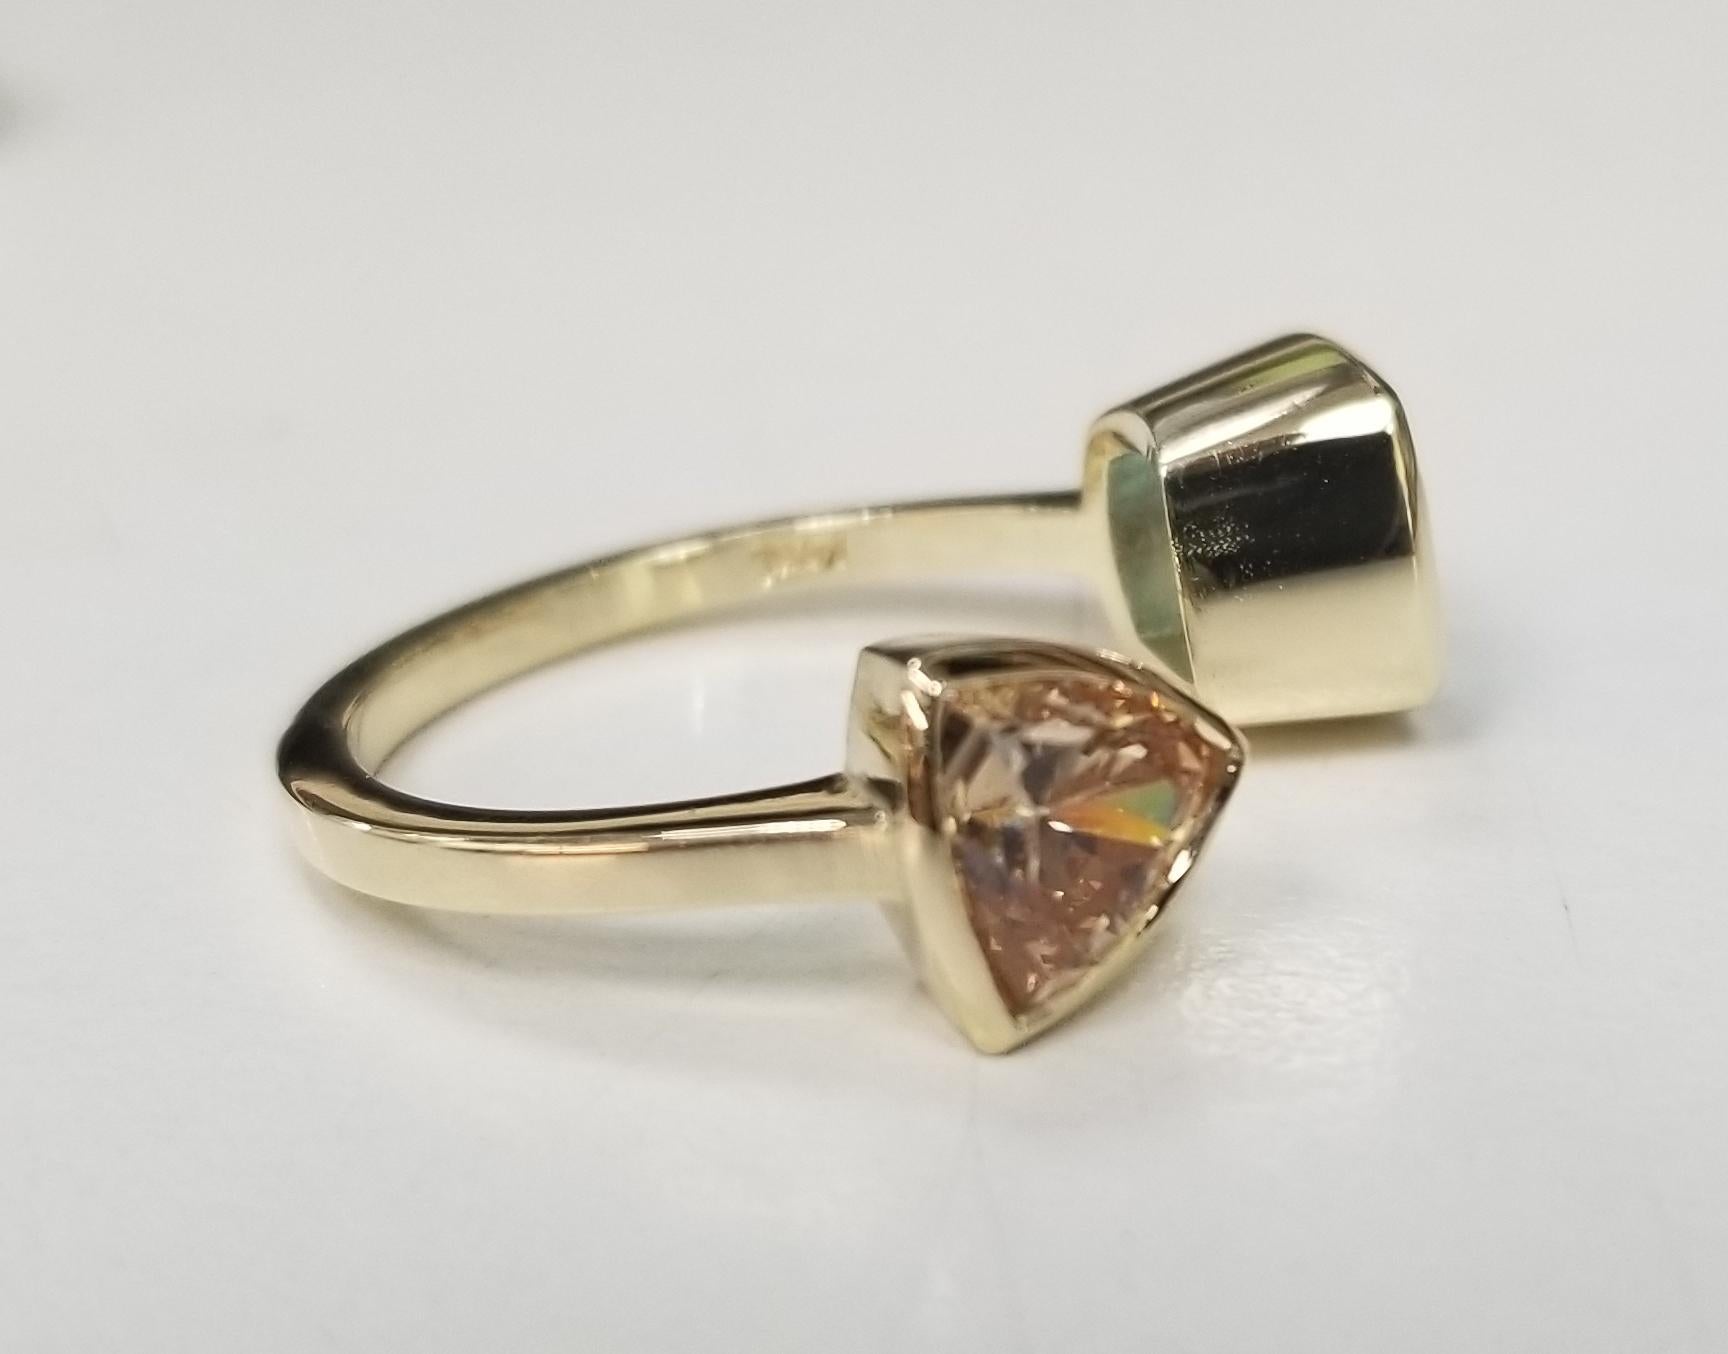 14K yellow gold topaz and blue topaz split ring
Specifications:
    MAIN stone:  Topaz trillion 1.56cts.
    Additional stones:  Blue Topaz cushion 1.91cts.
    metal: 14K YELLOW GOLD
    type: RING
    weight: 4.5 GRS 
    size: 6.5 US
*Pick your